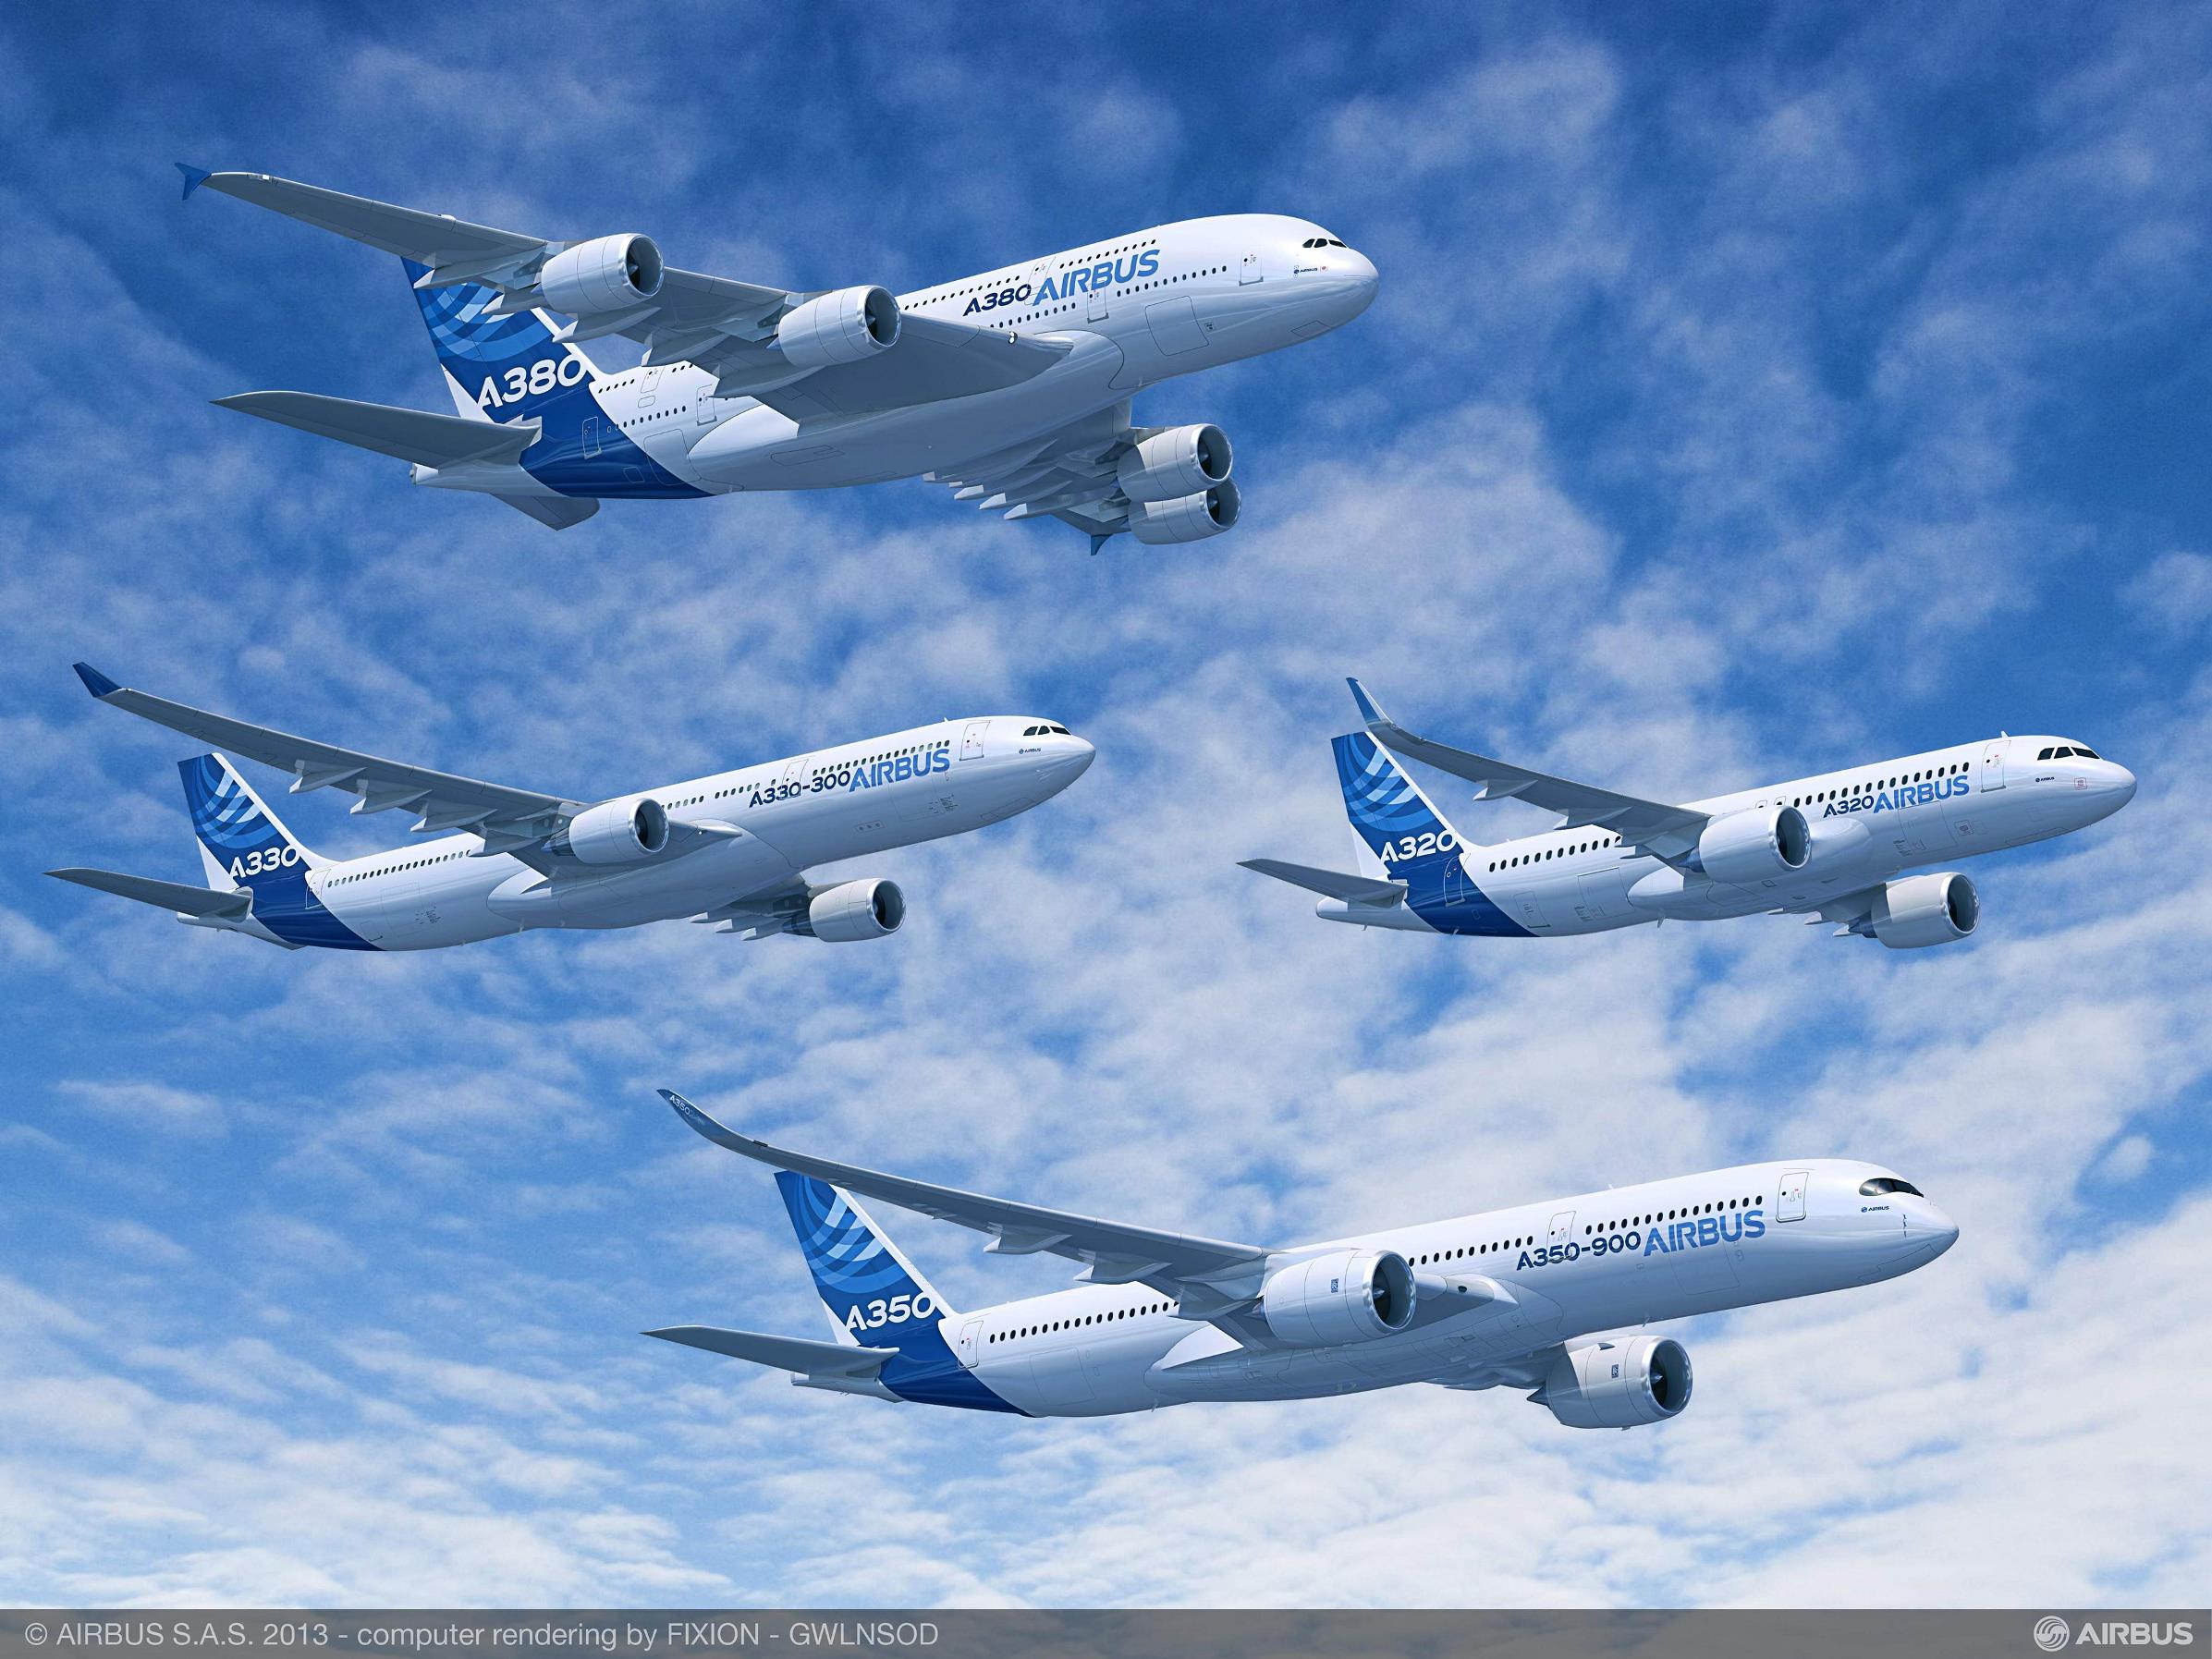 The year in review: Airbus’ 2015 highlights adjusted